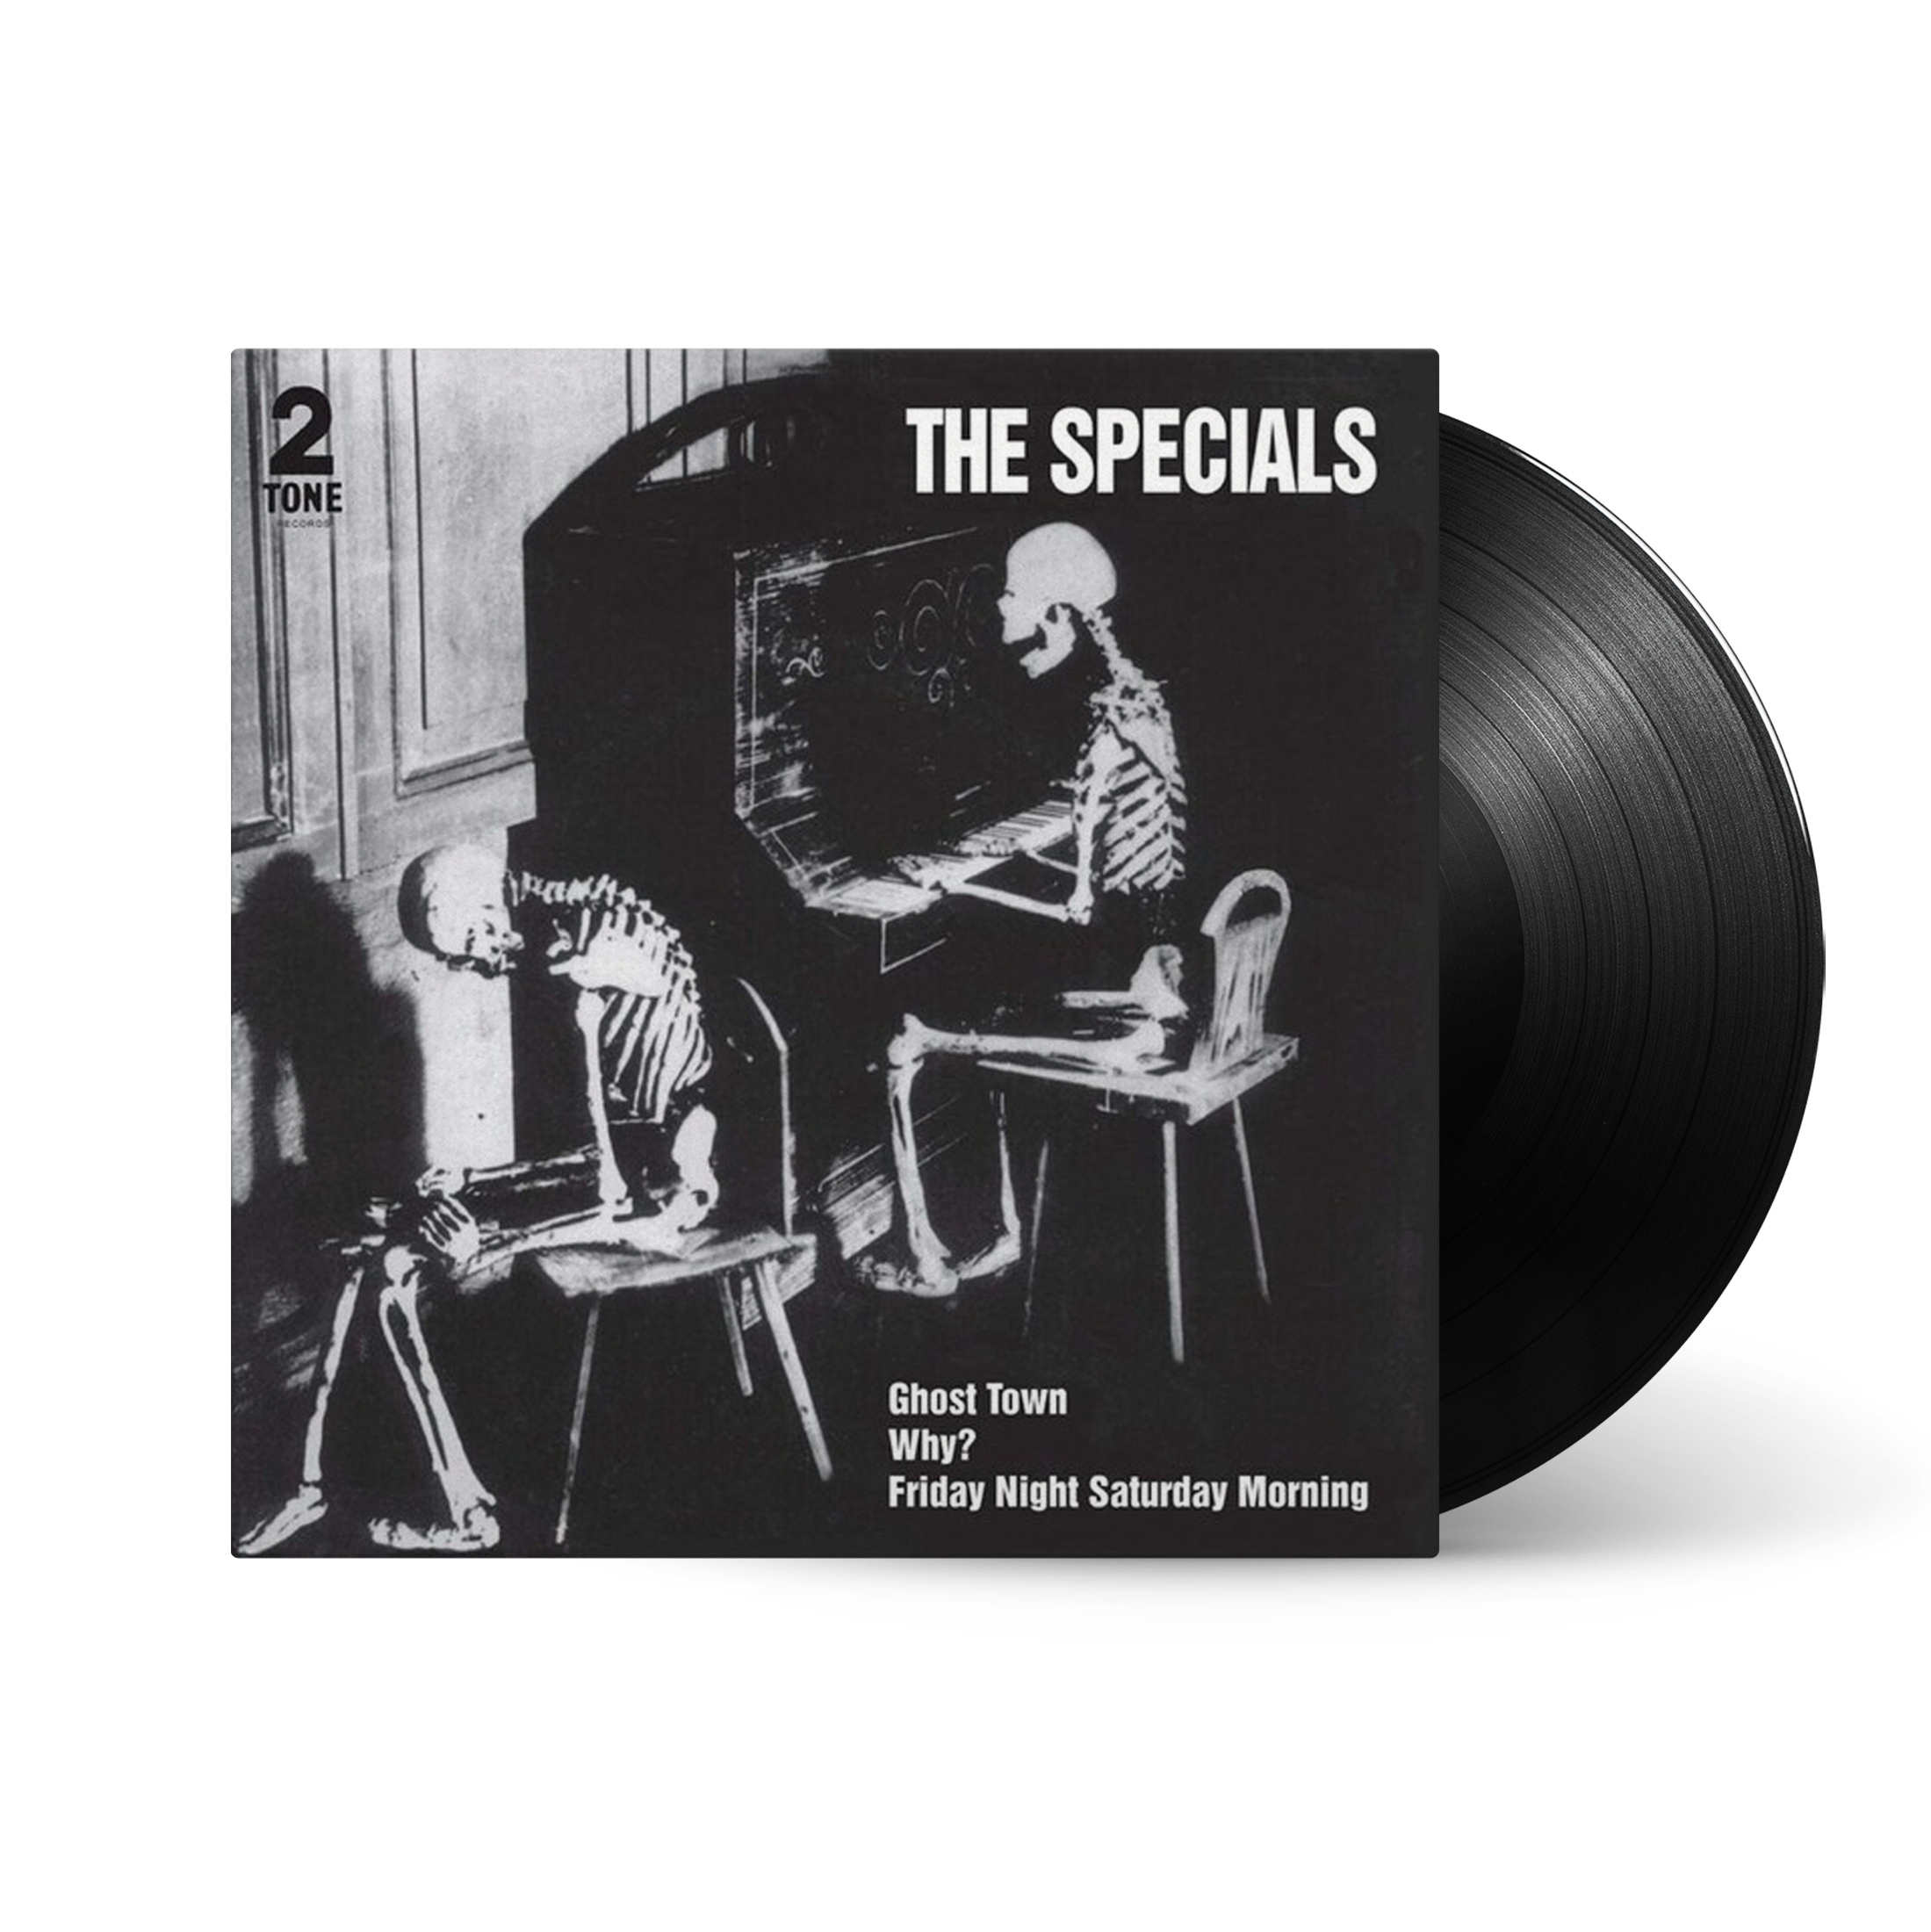 The Specials - Ghost Town (40th Anniversary Half Speed Master): Vinyl 12" Single.